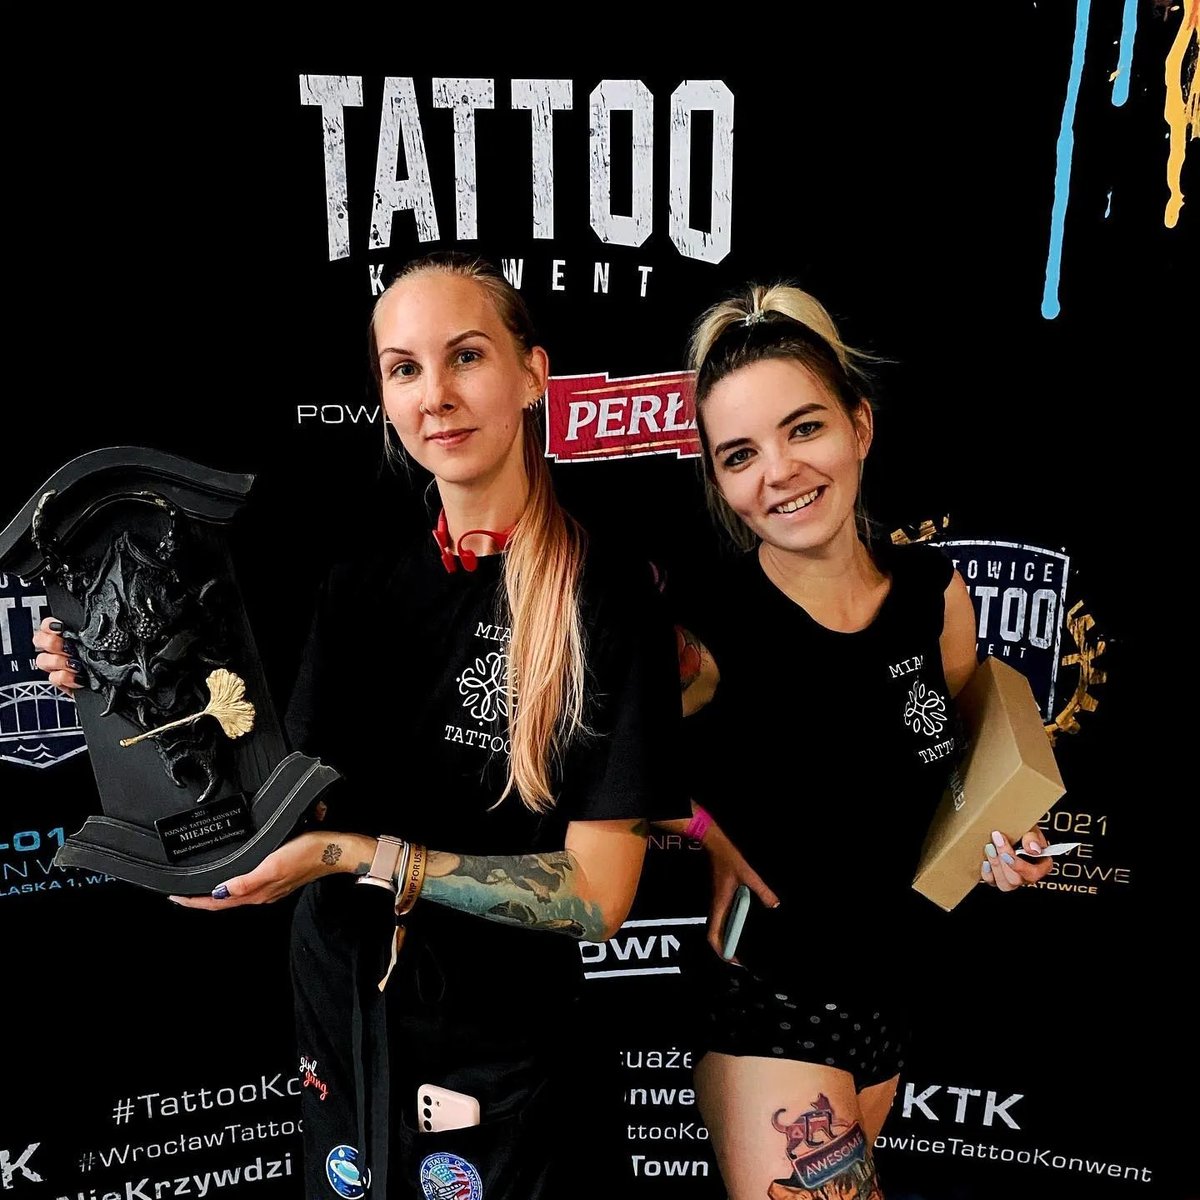 Highly skilled artist with an advanced degree in art and a winner of European tattoo conventions, Lina Anenkova, a tattooist who has taken first place in European tattoo conventions, hails from the Miami Tattoo studio in Vancouver, British Columbia.